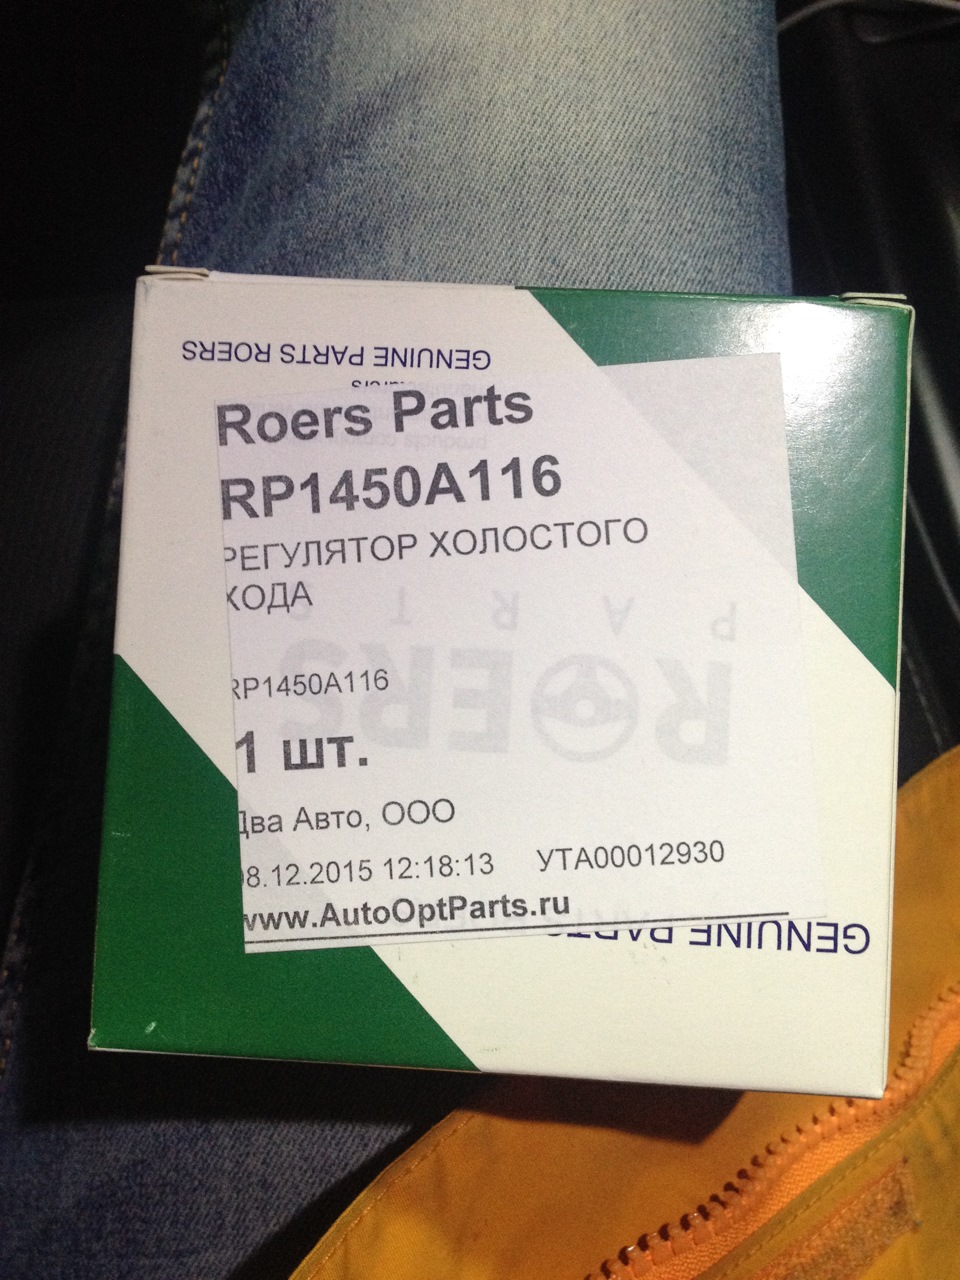 Roers parts производитель. Roers Parts rp1450a116. 1450a116. Roers-Parts запчасти Страна. Roers-Parts rp12tb012.